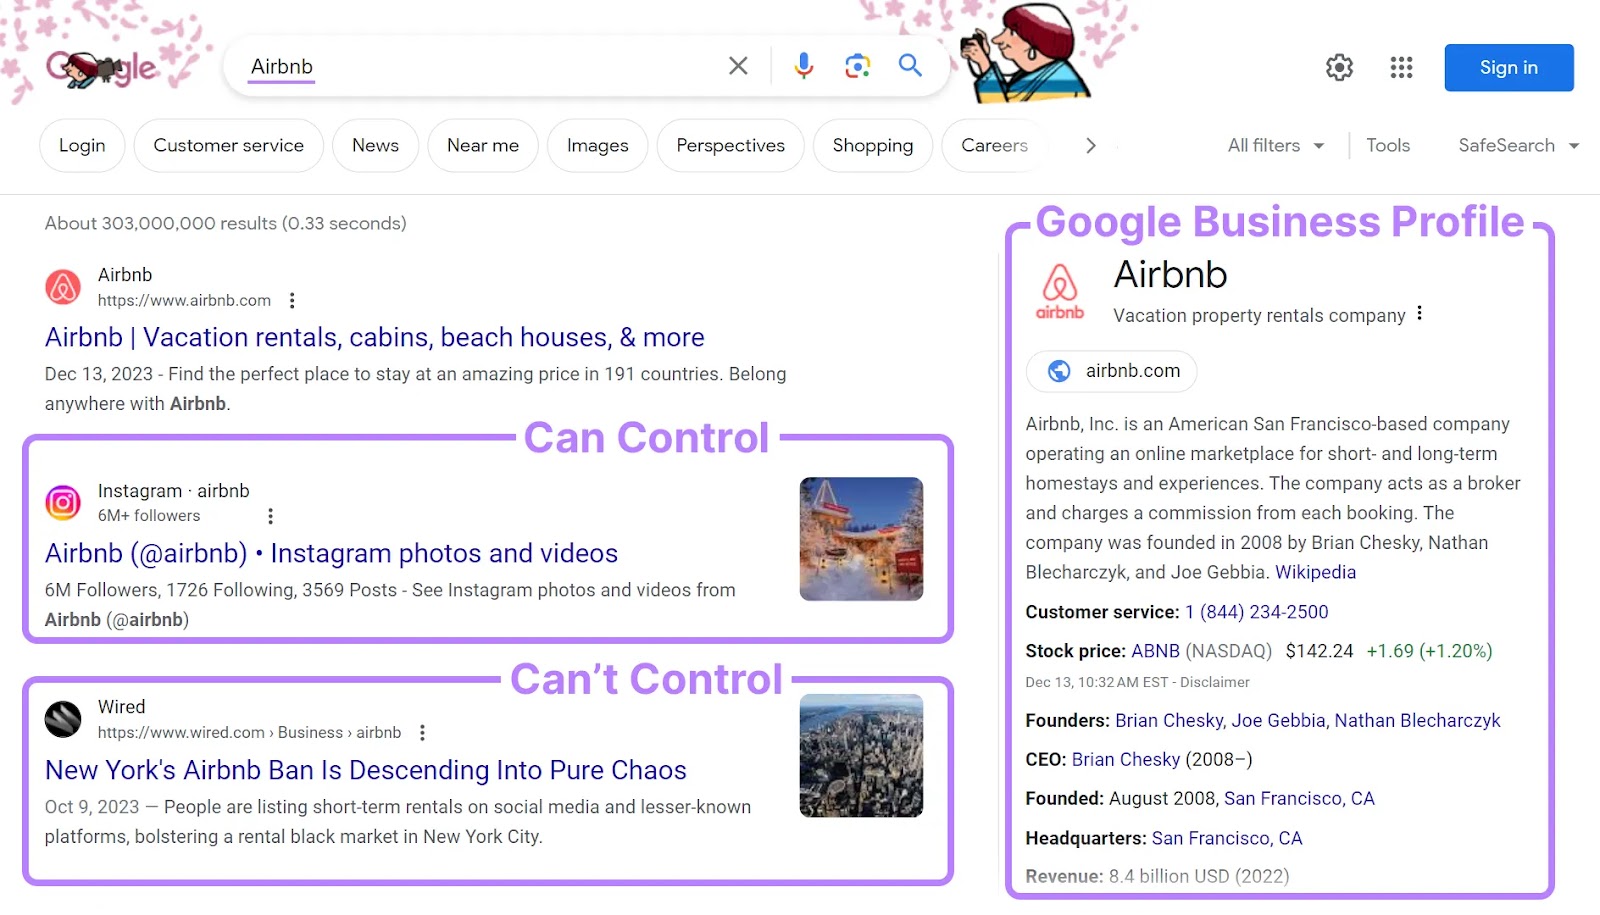 Google's SERP for "Airbnb"